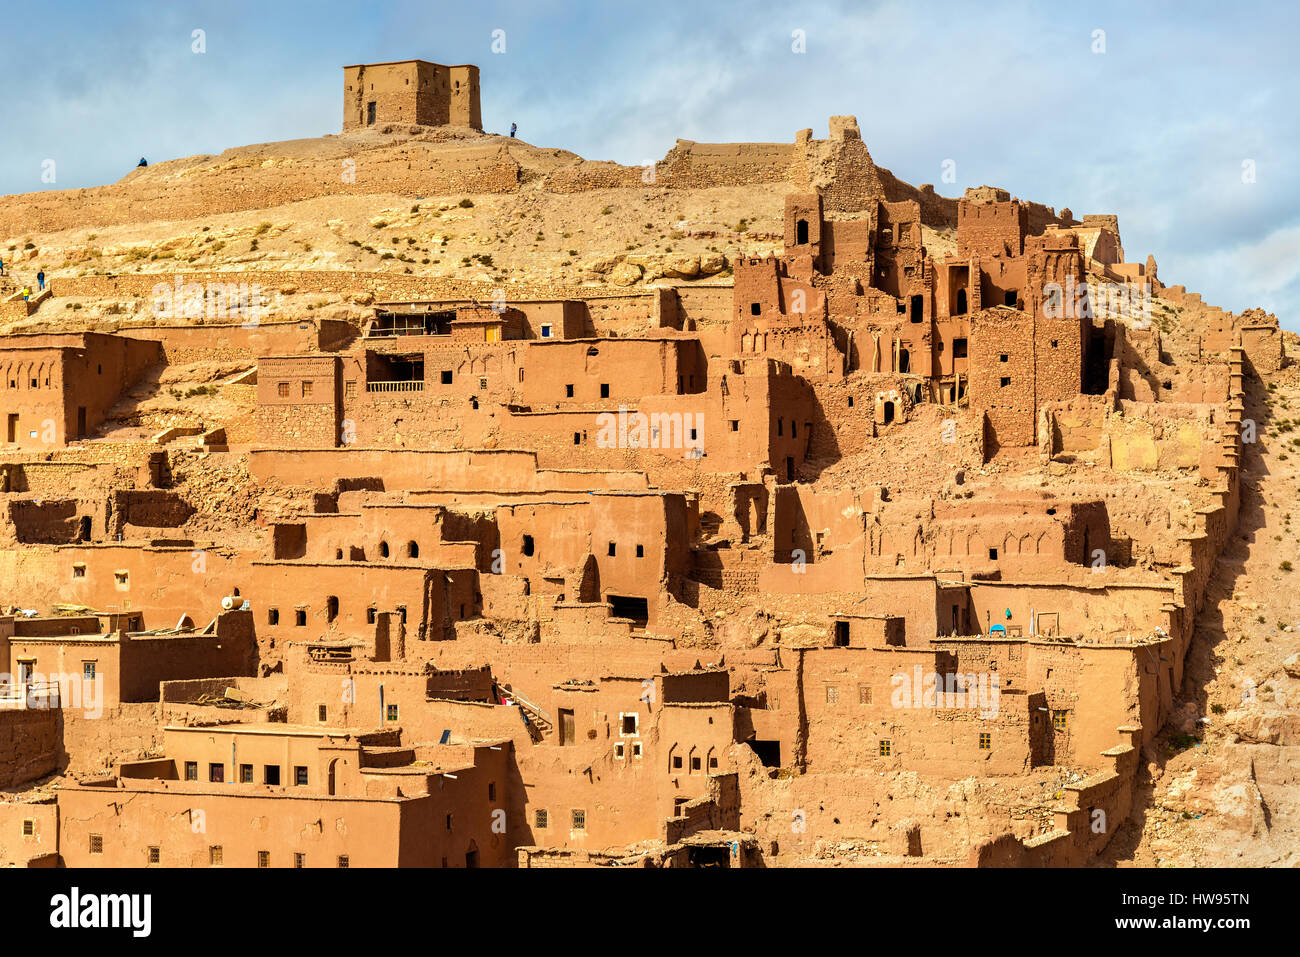 Traditional clay houses in Ait Ben Haddou village, a UNESCO heritage site in Morocco Stock Photo